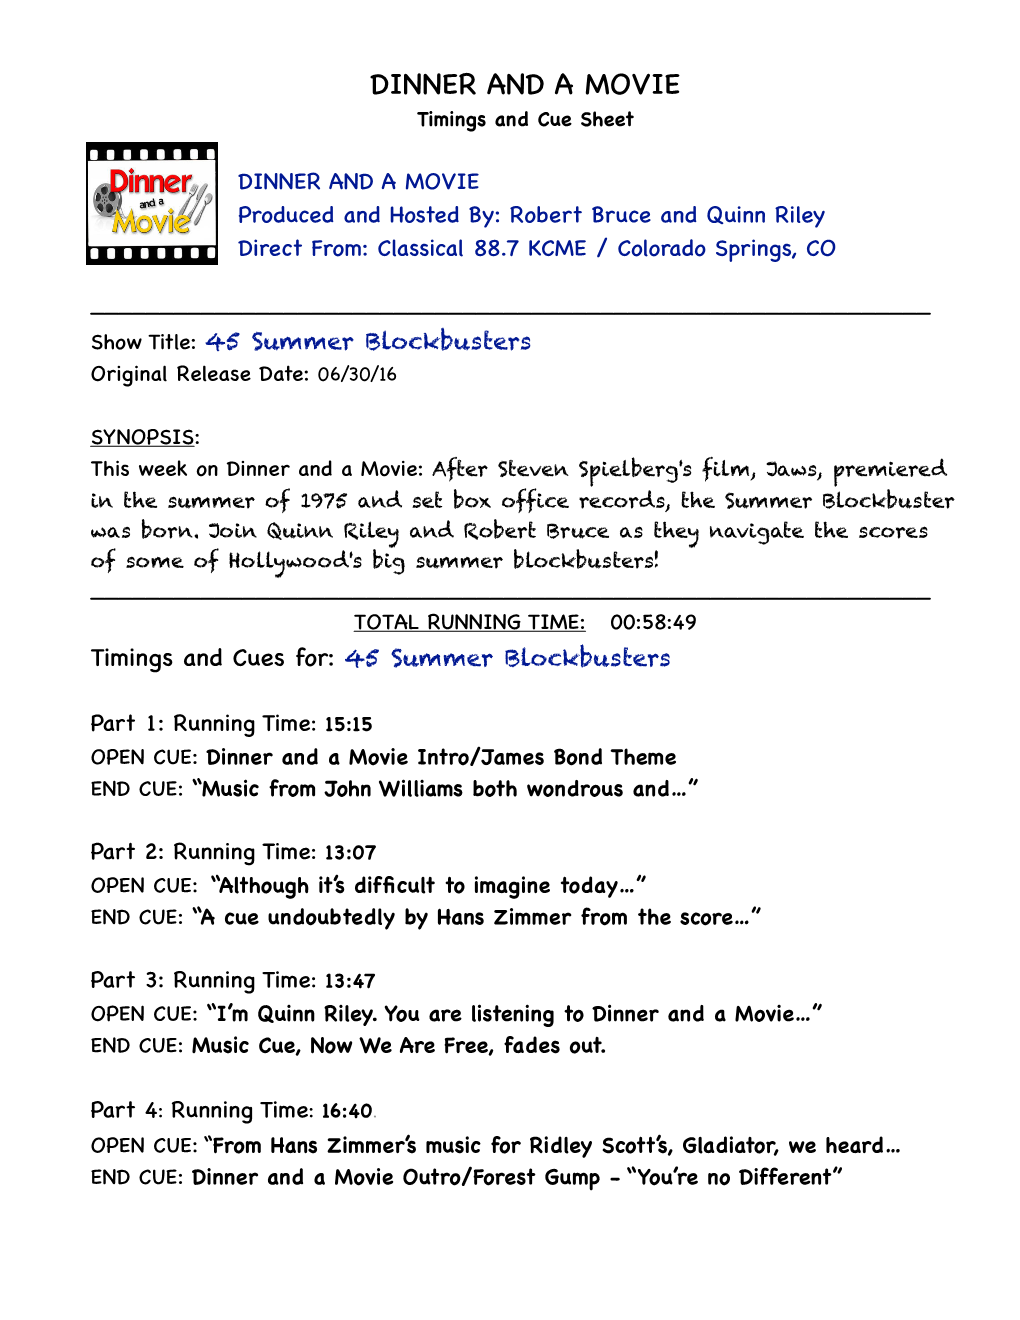 45 Summer Blockbusters Cue Sheet and Discography